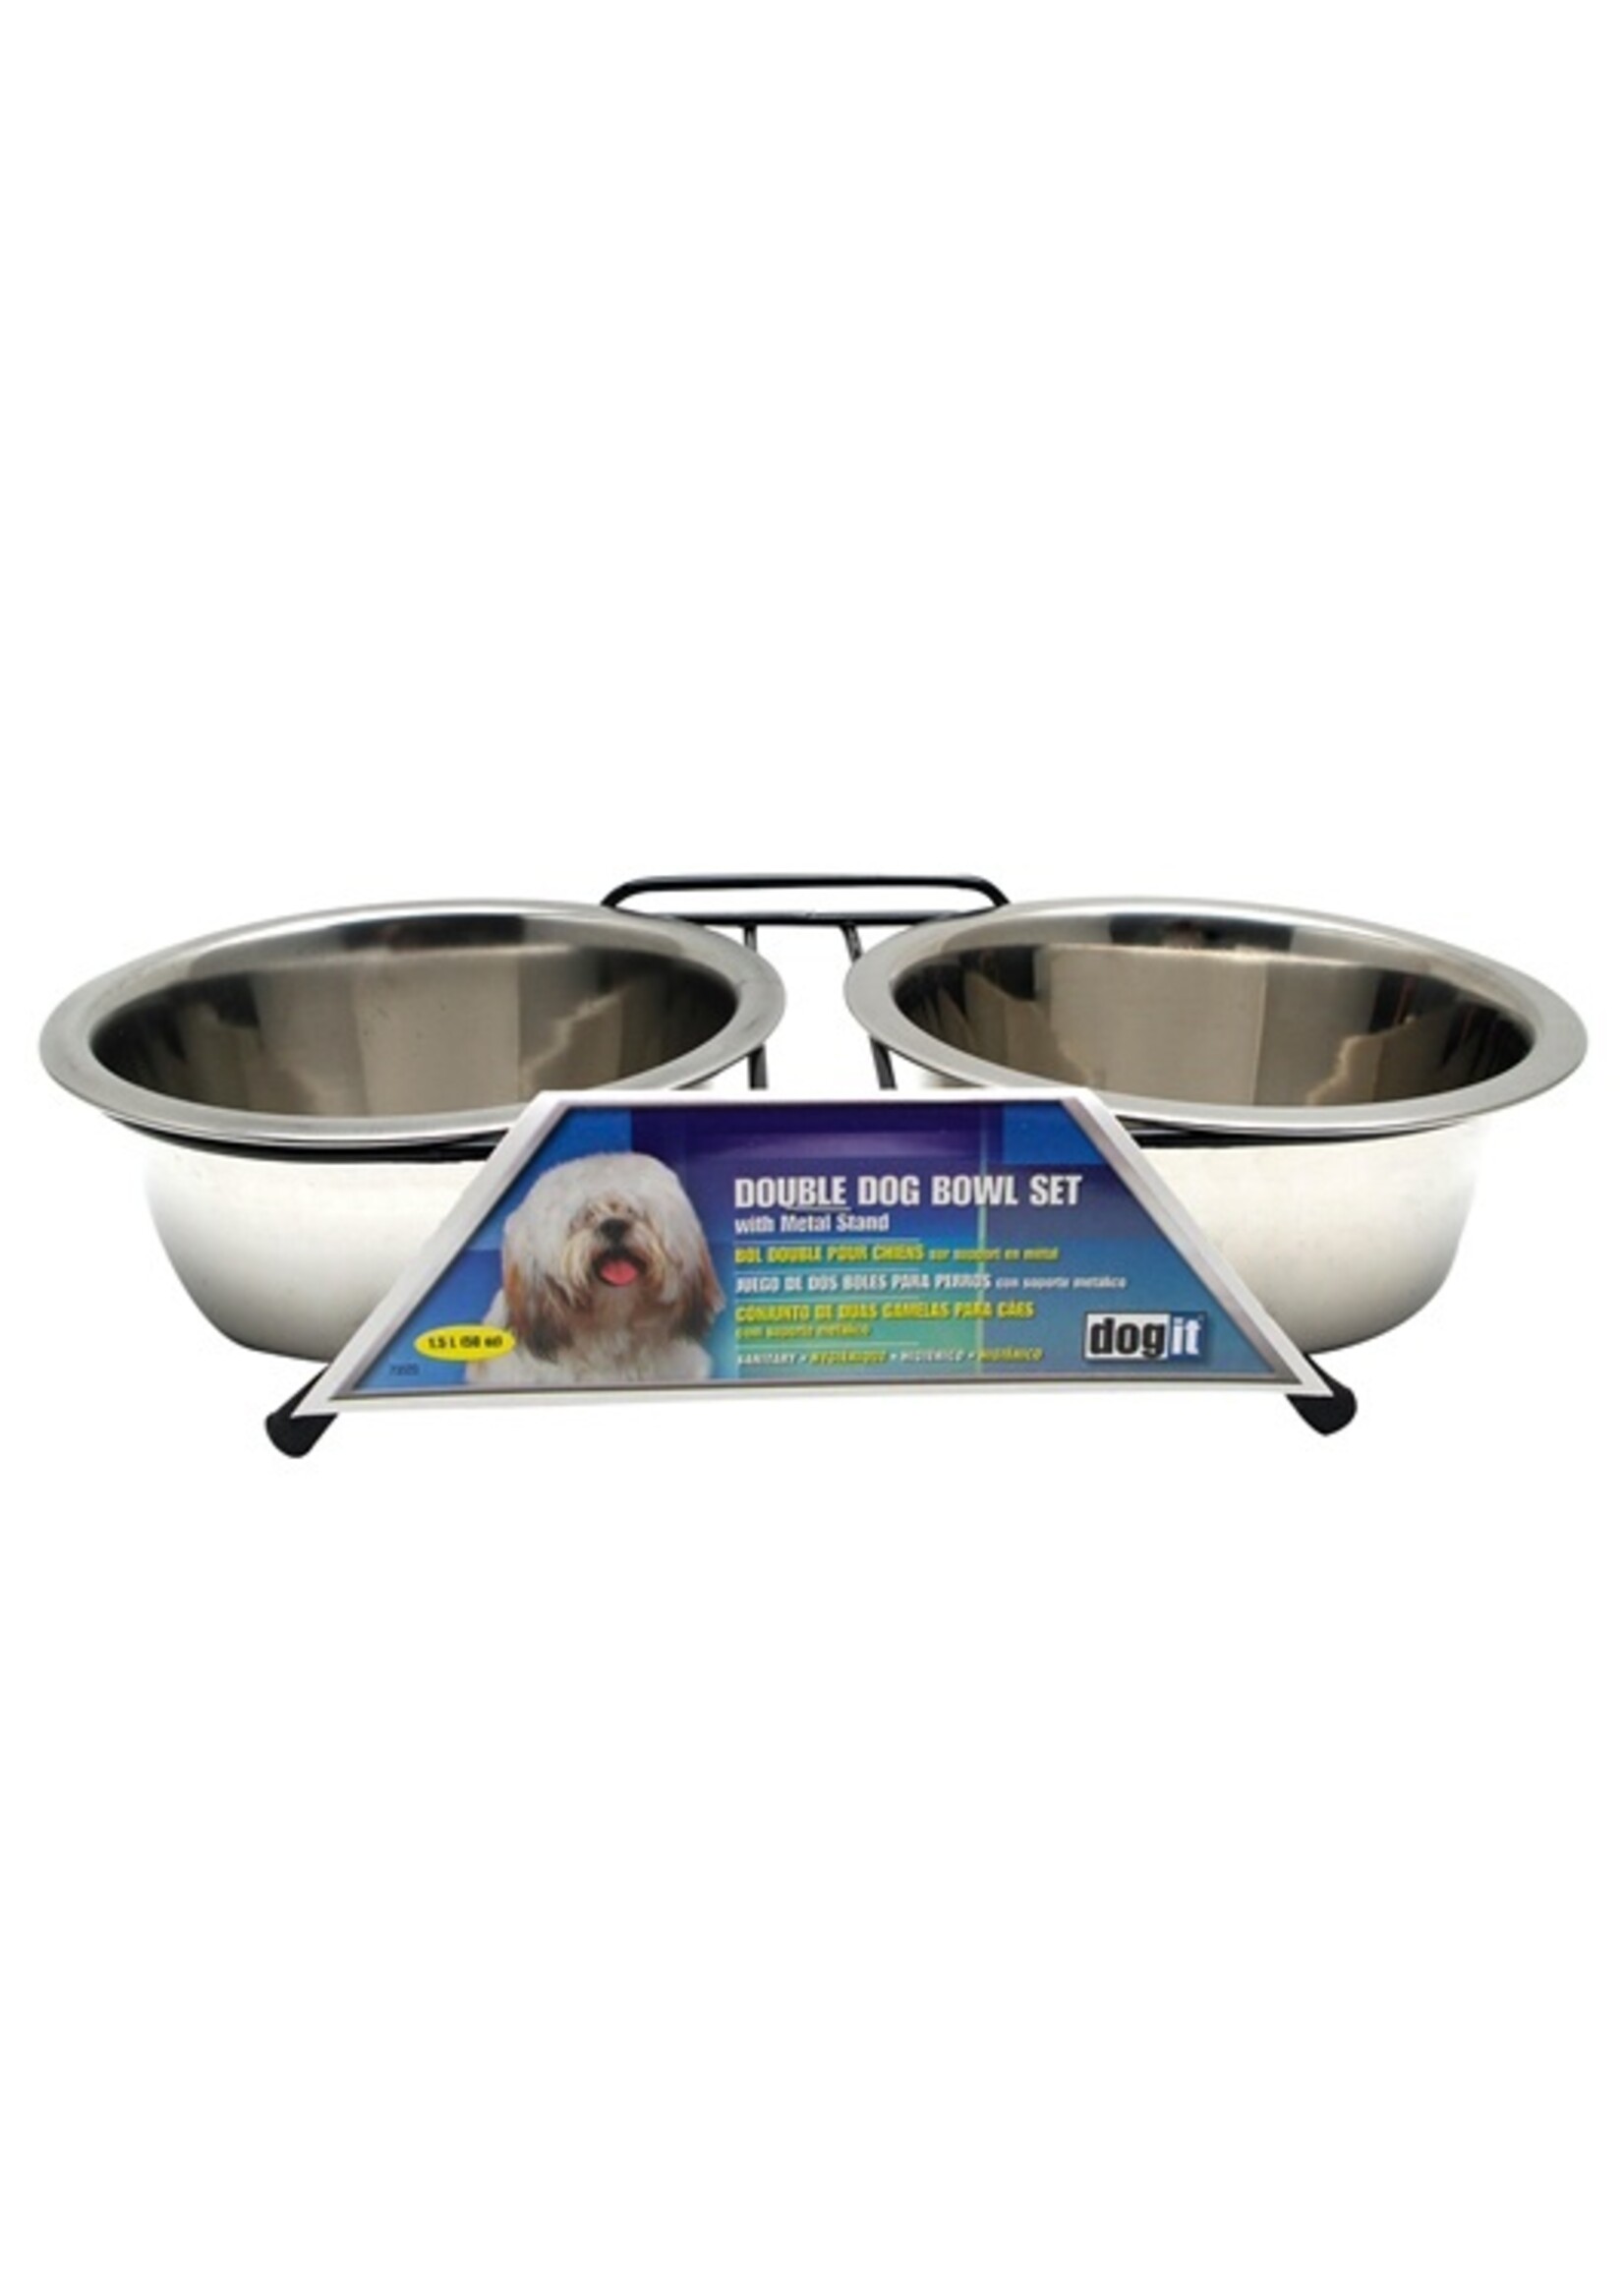 Dogit Dogit Stainless Steel Double Dog Diner